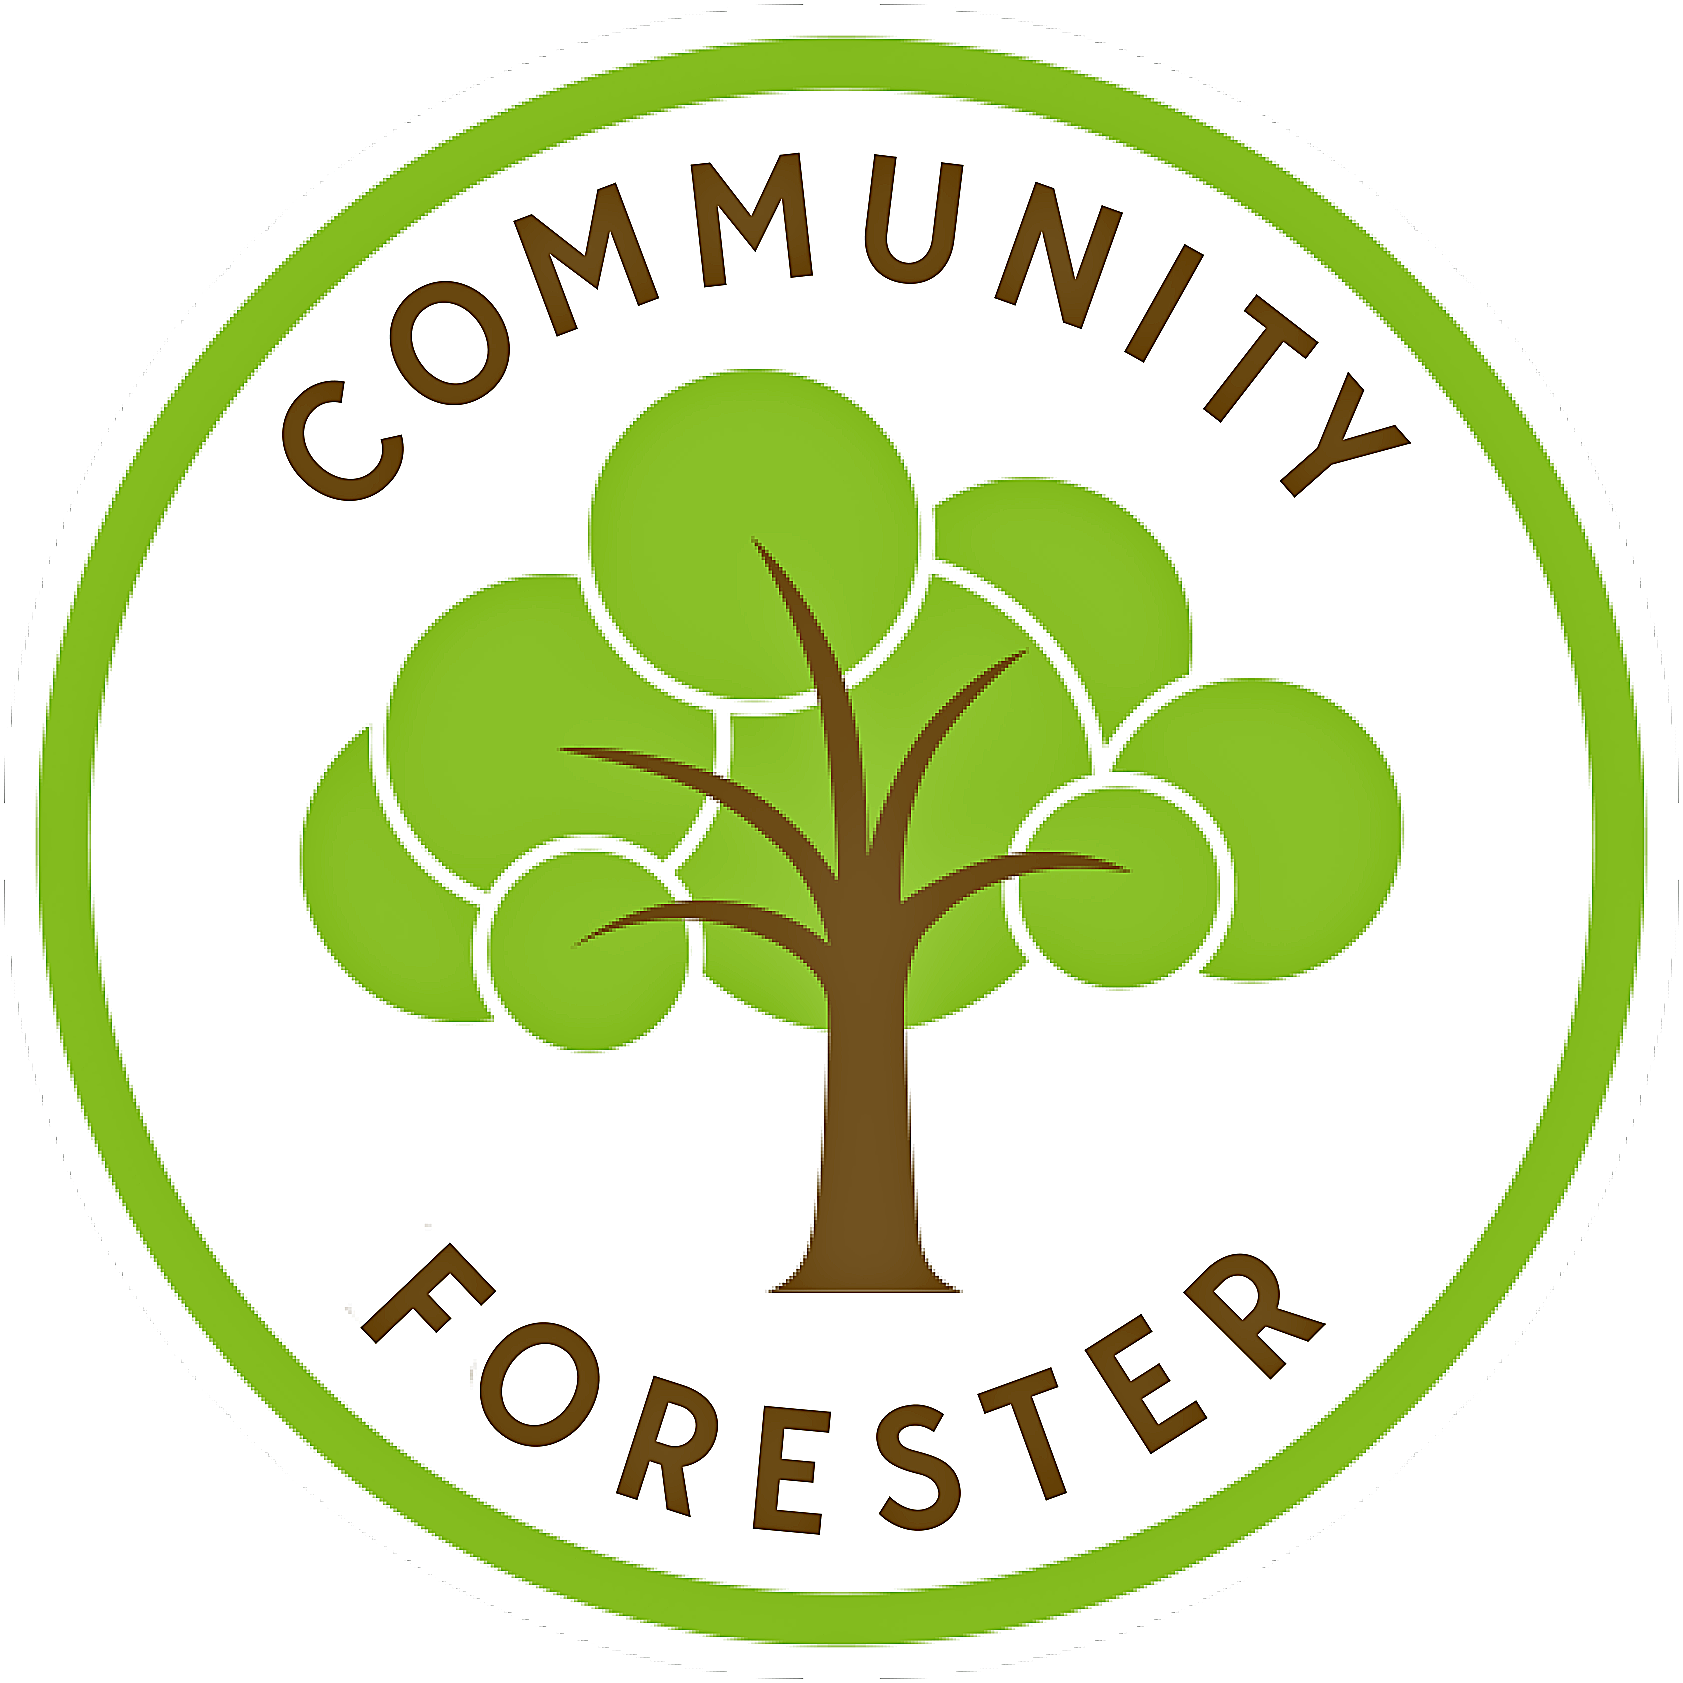 Small Community Forester Emblem.png